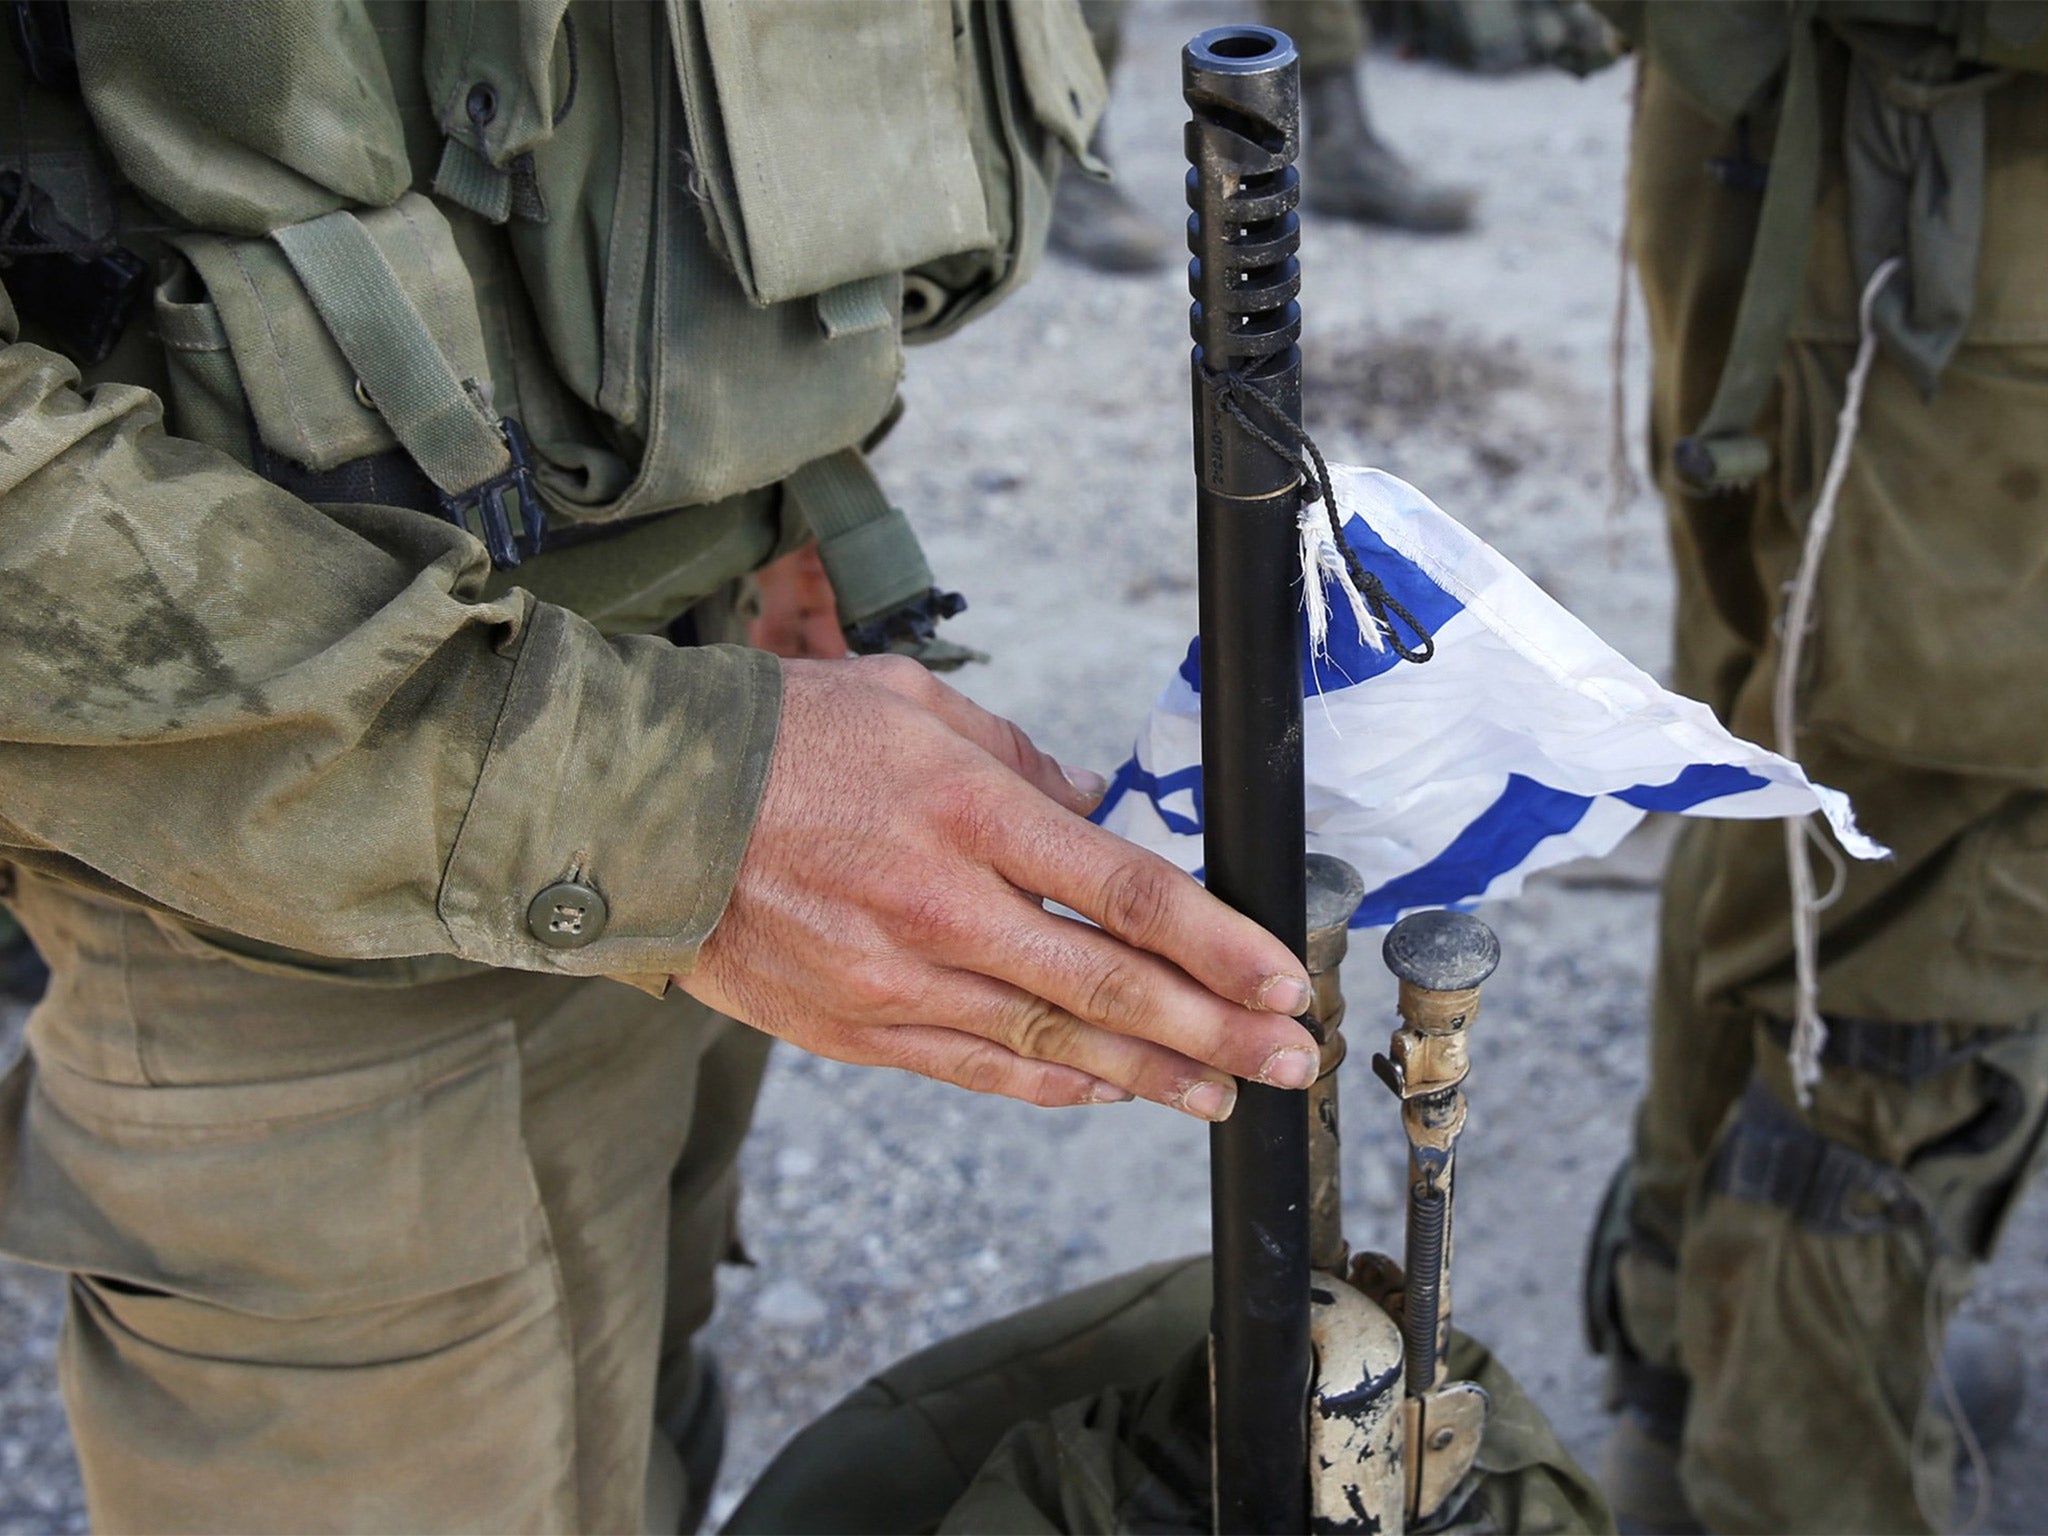 Israel’s military continued its campaign of intensified attacks against Hamas